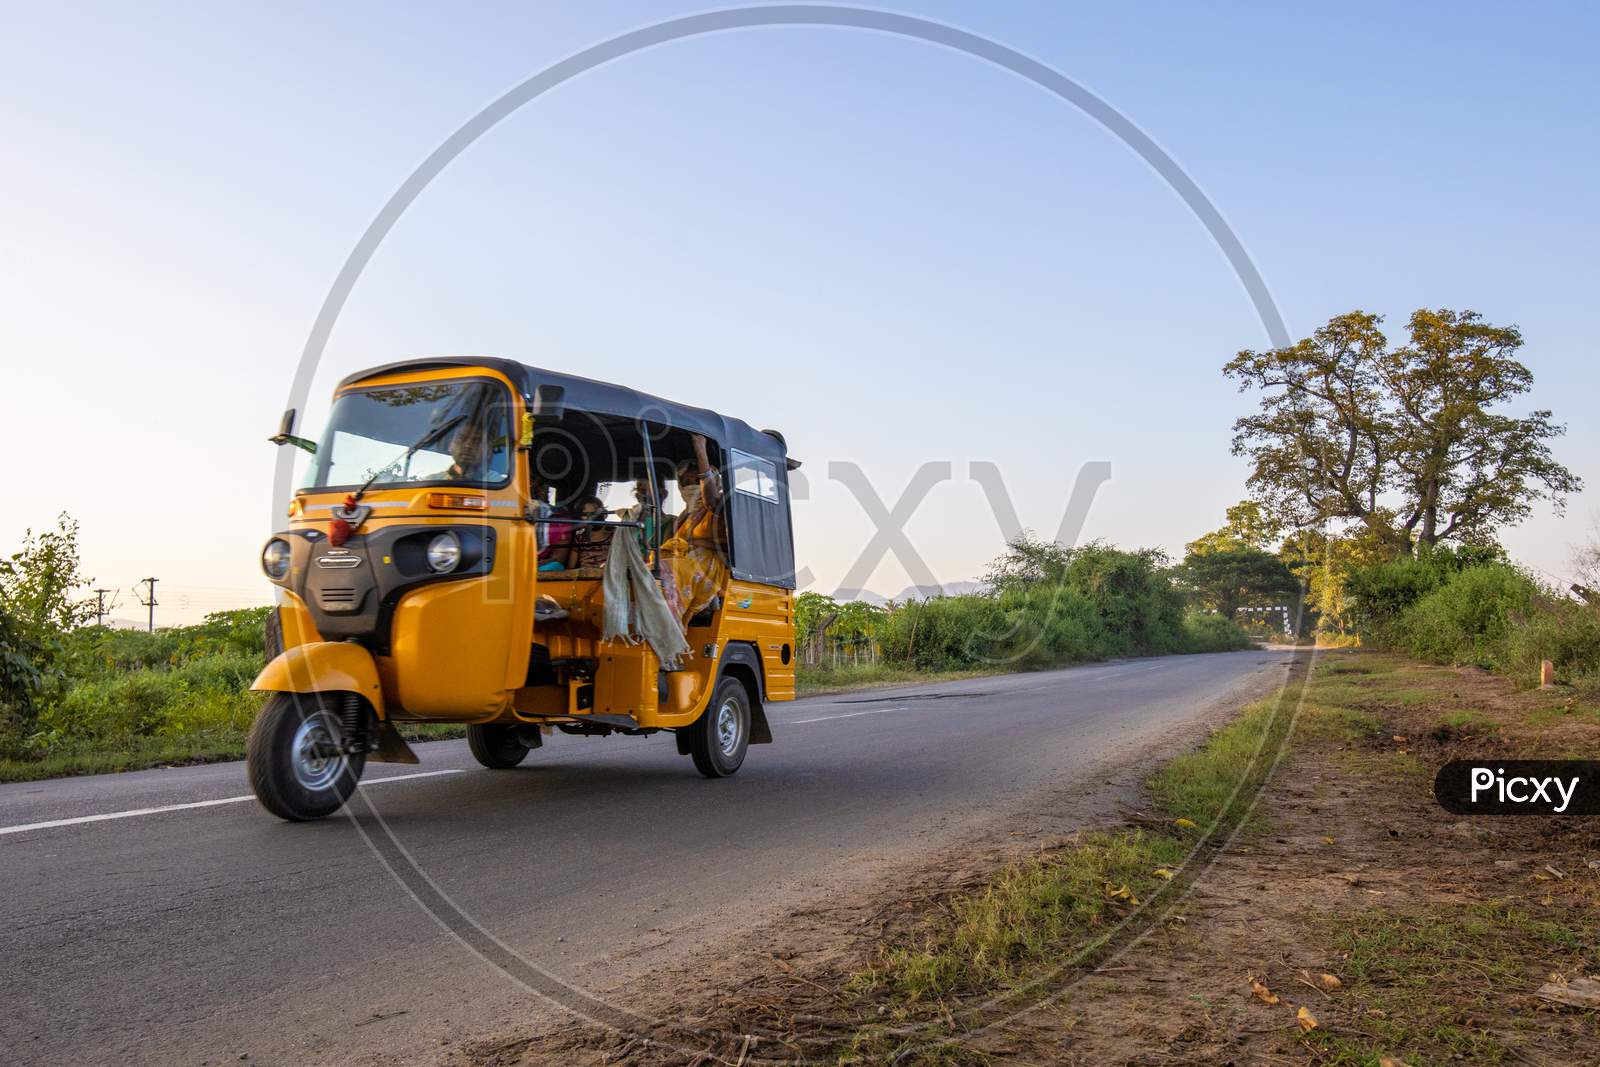 Auto rickshaw travelling with passengers on Indian State Highway